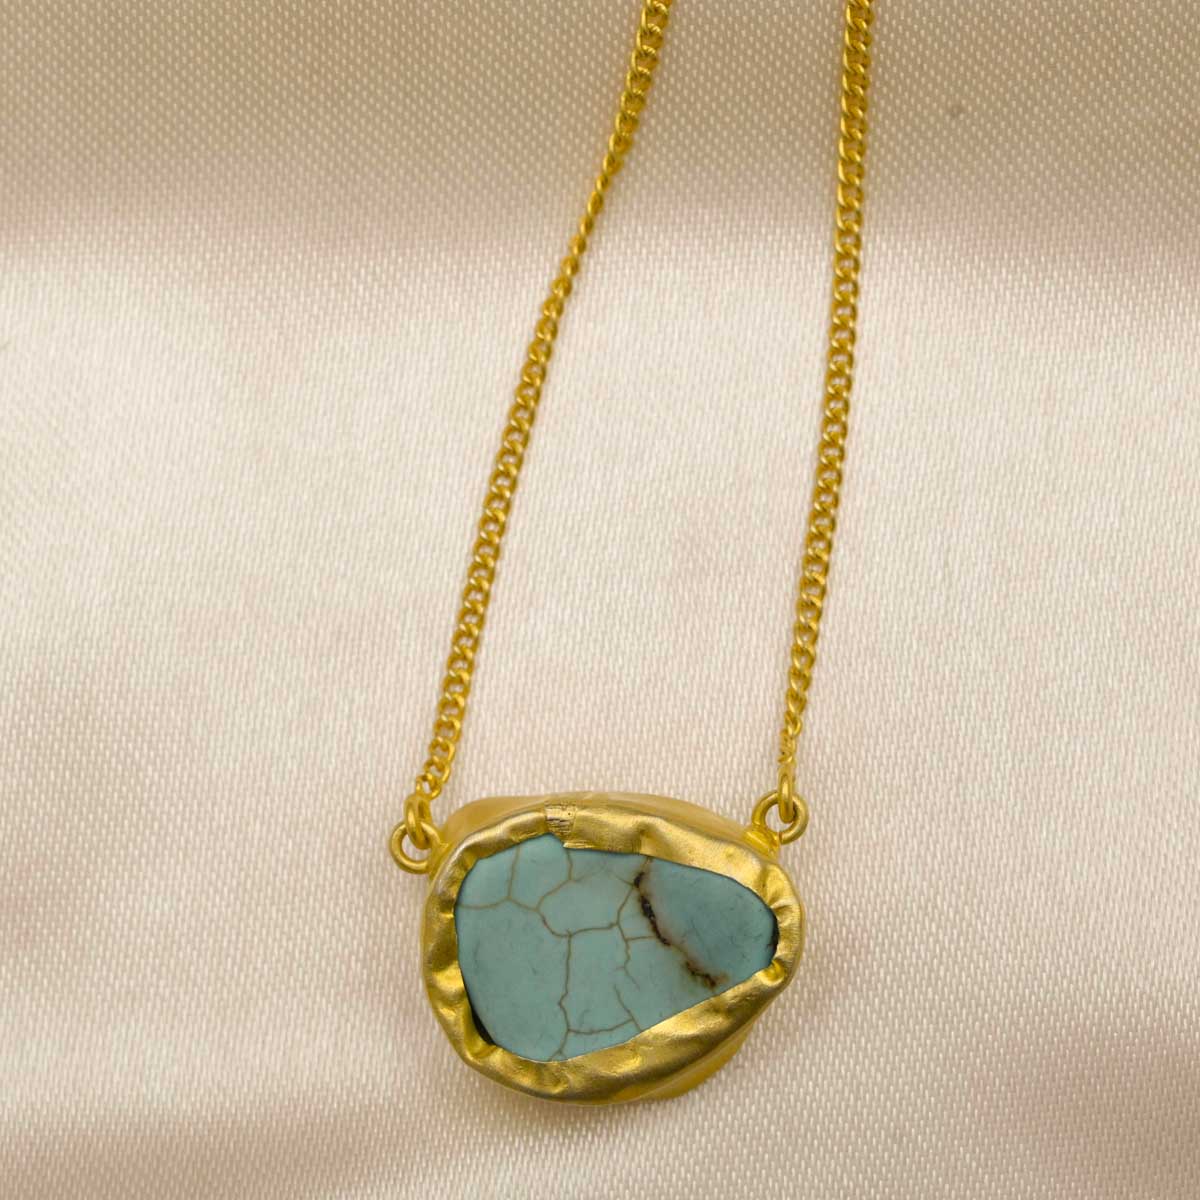 Native Figure Turquoise Pendant Necklace 14K Yellow Gold